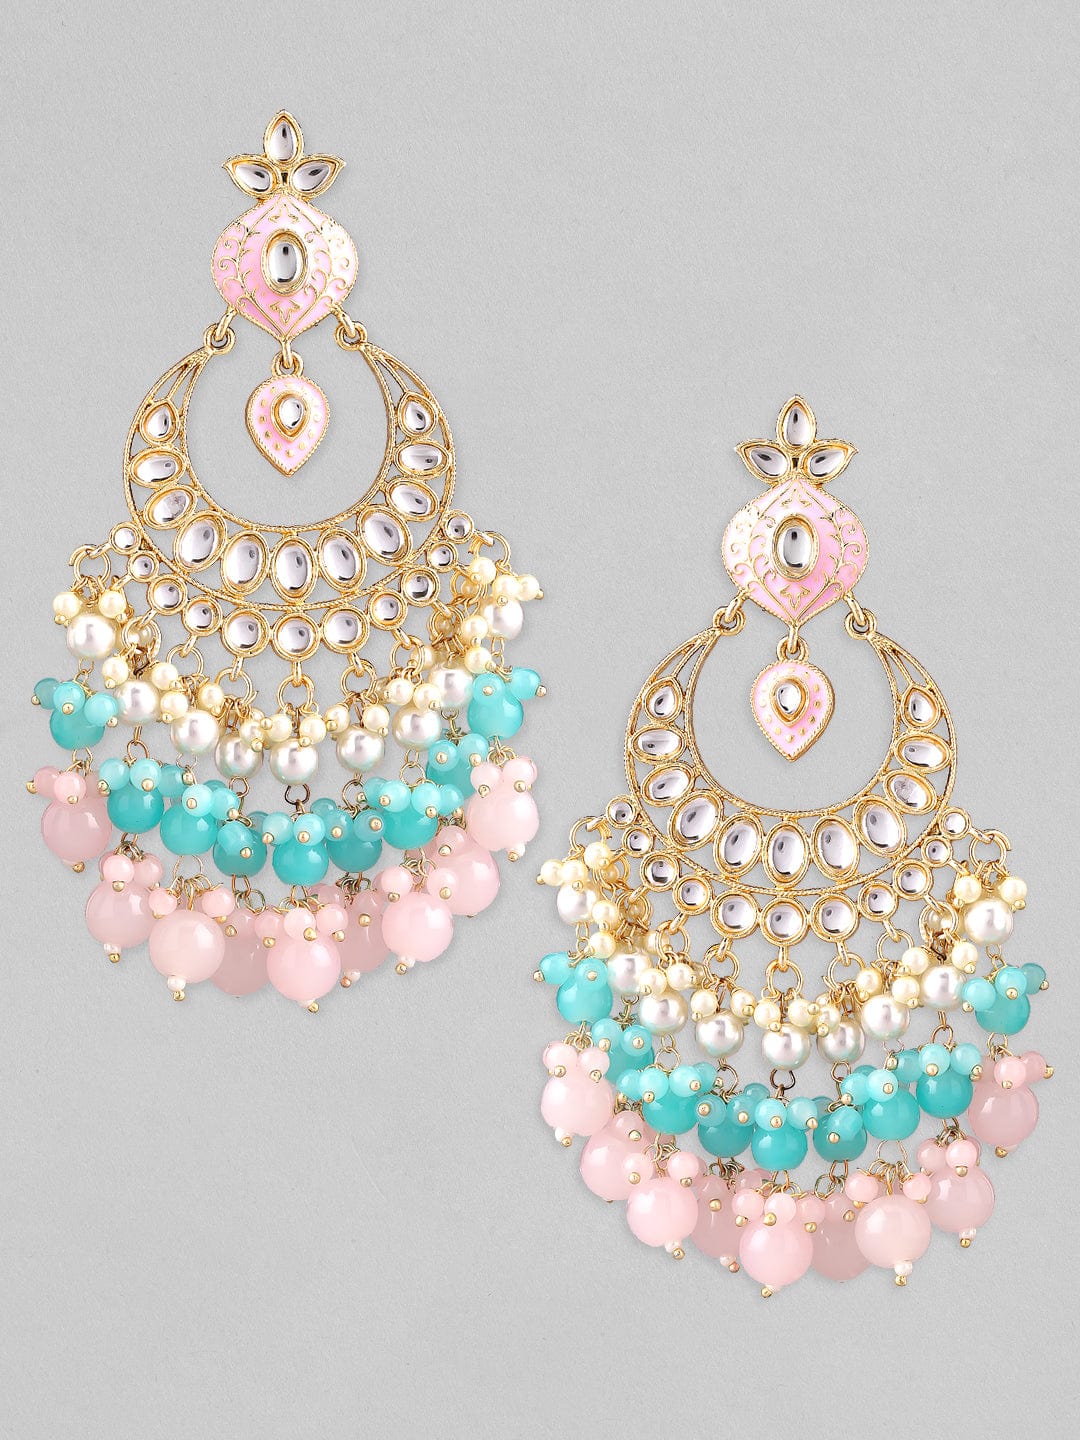 Rubans Gold Plated Pastel Color Chandbali Earrings With Pink Enamel And Beads. Earrings